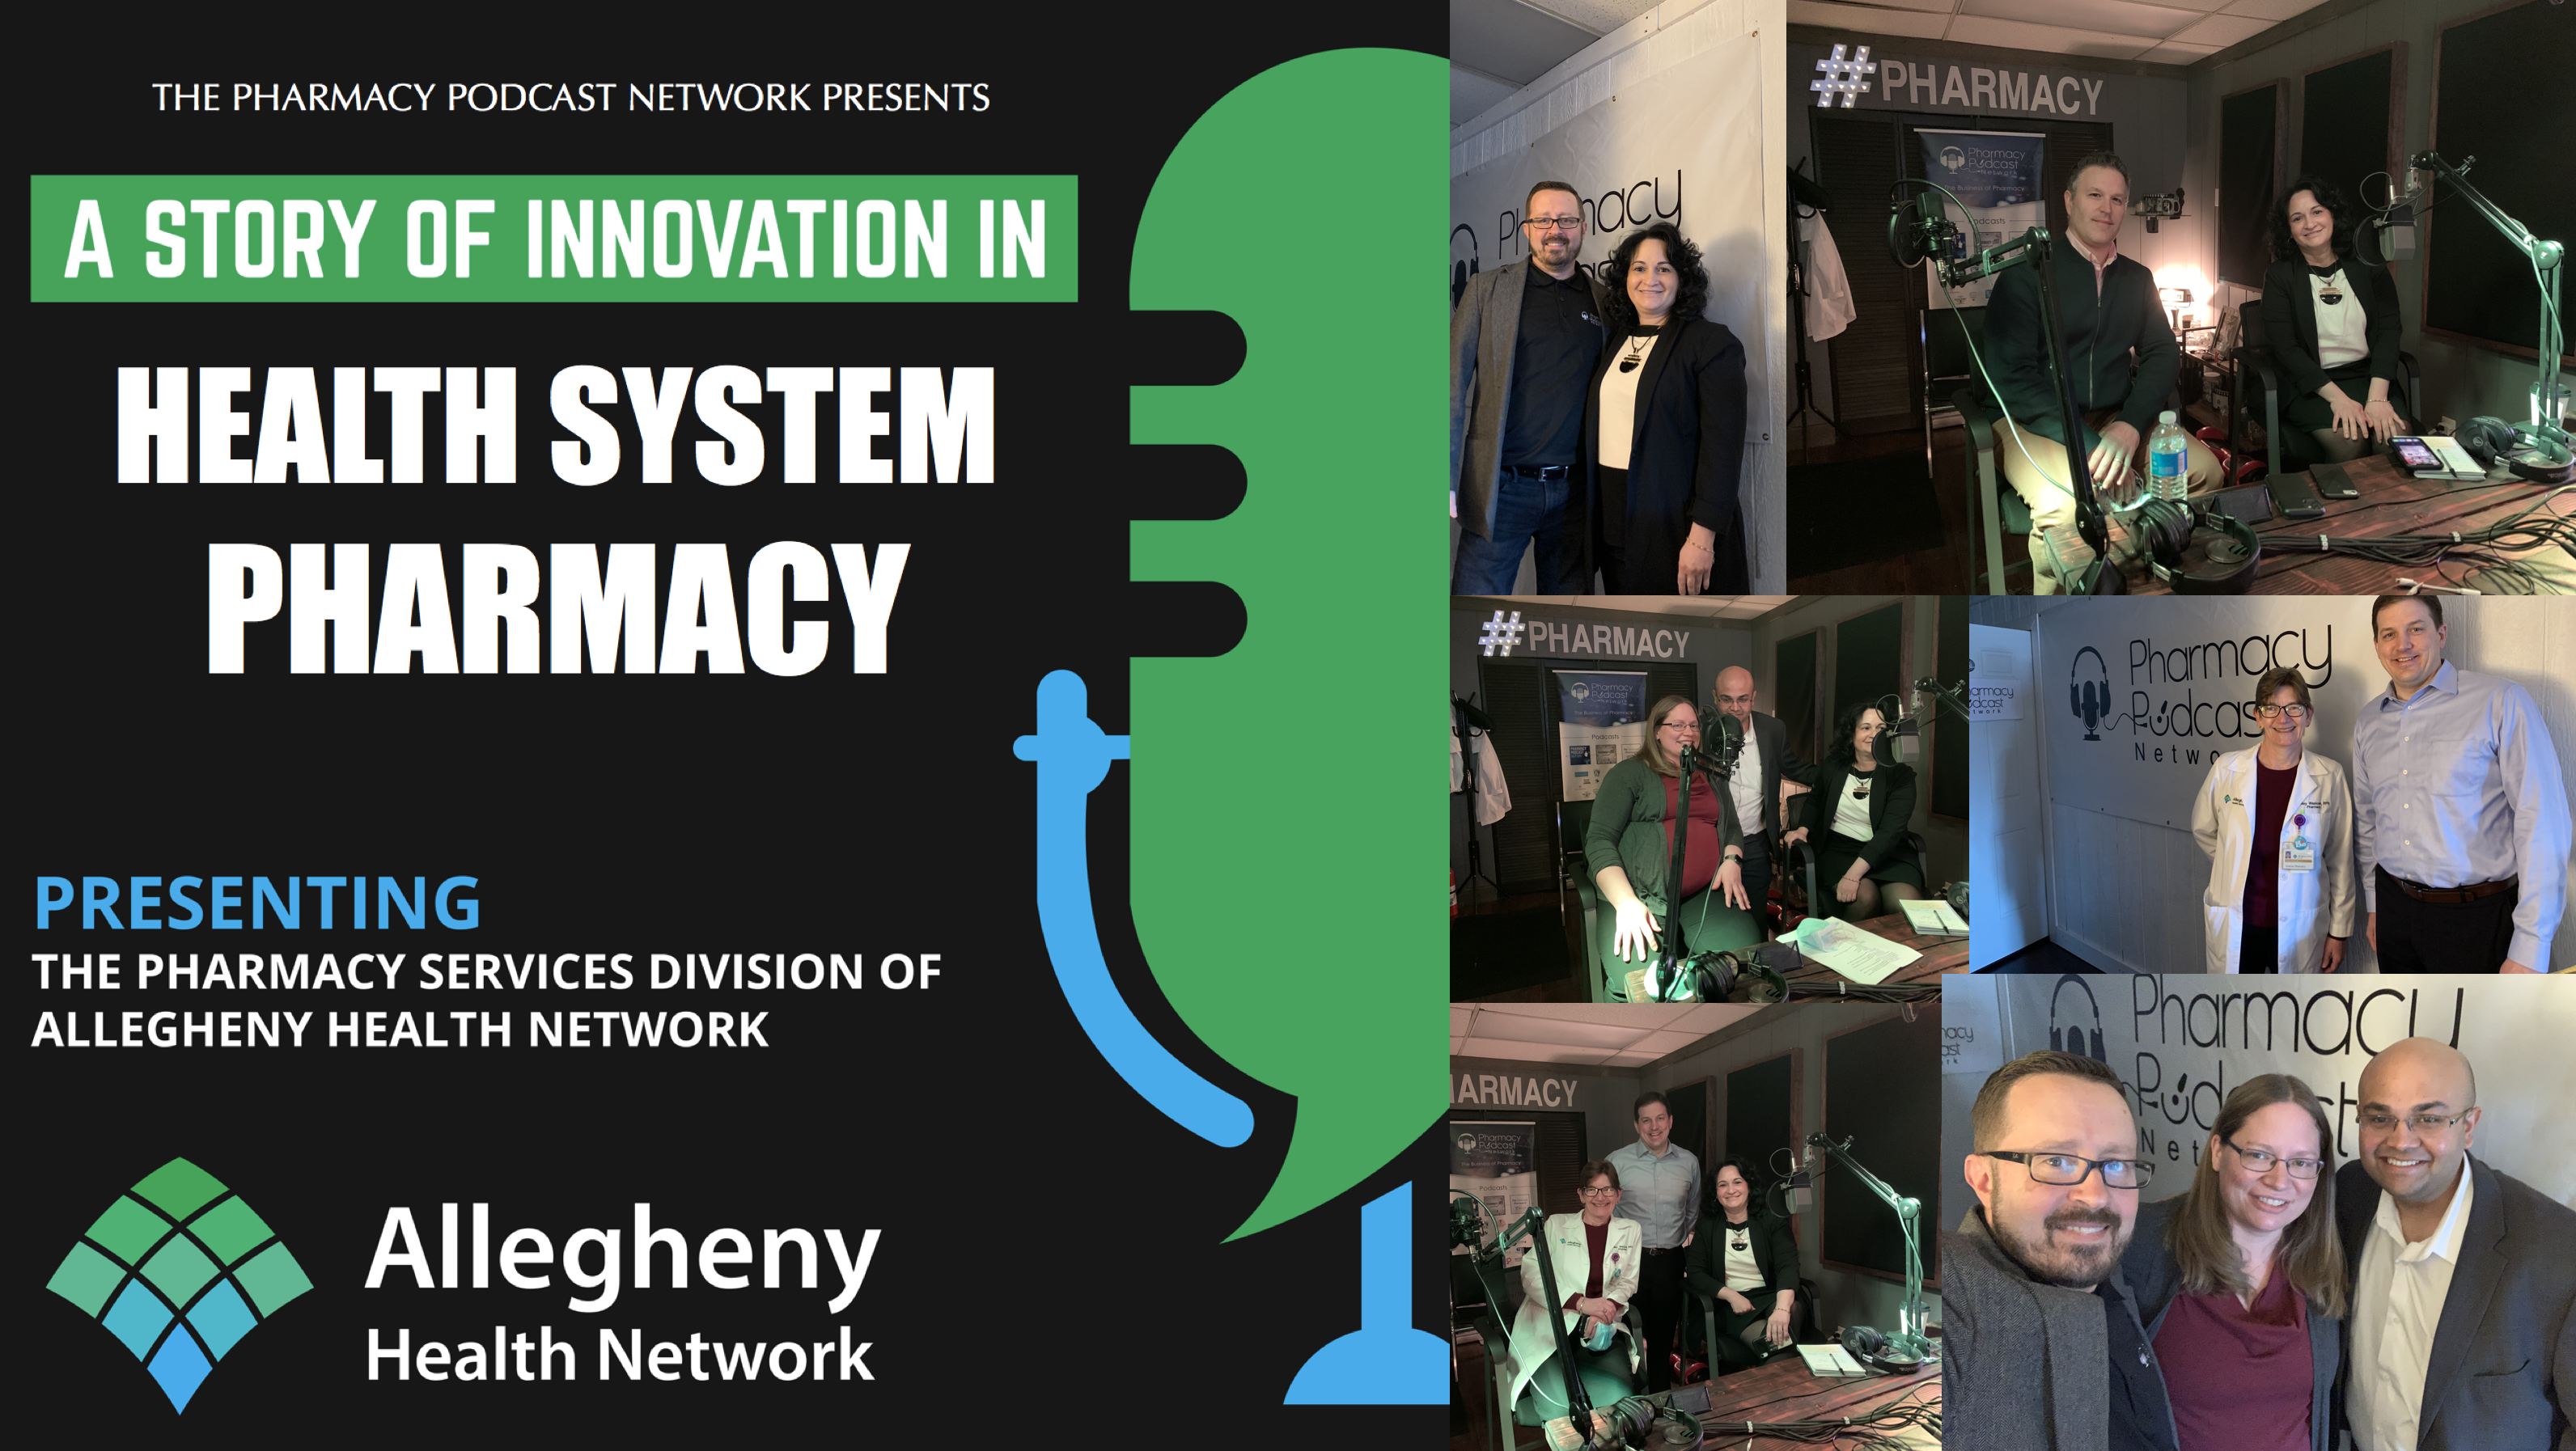 A Story of Innovation in Health System Pharmacy